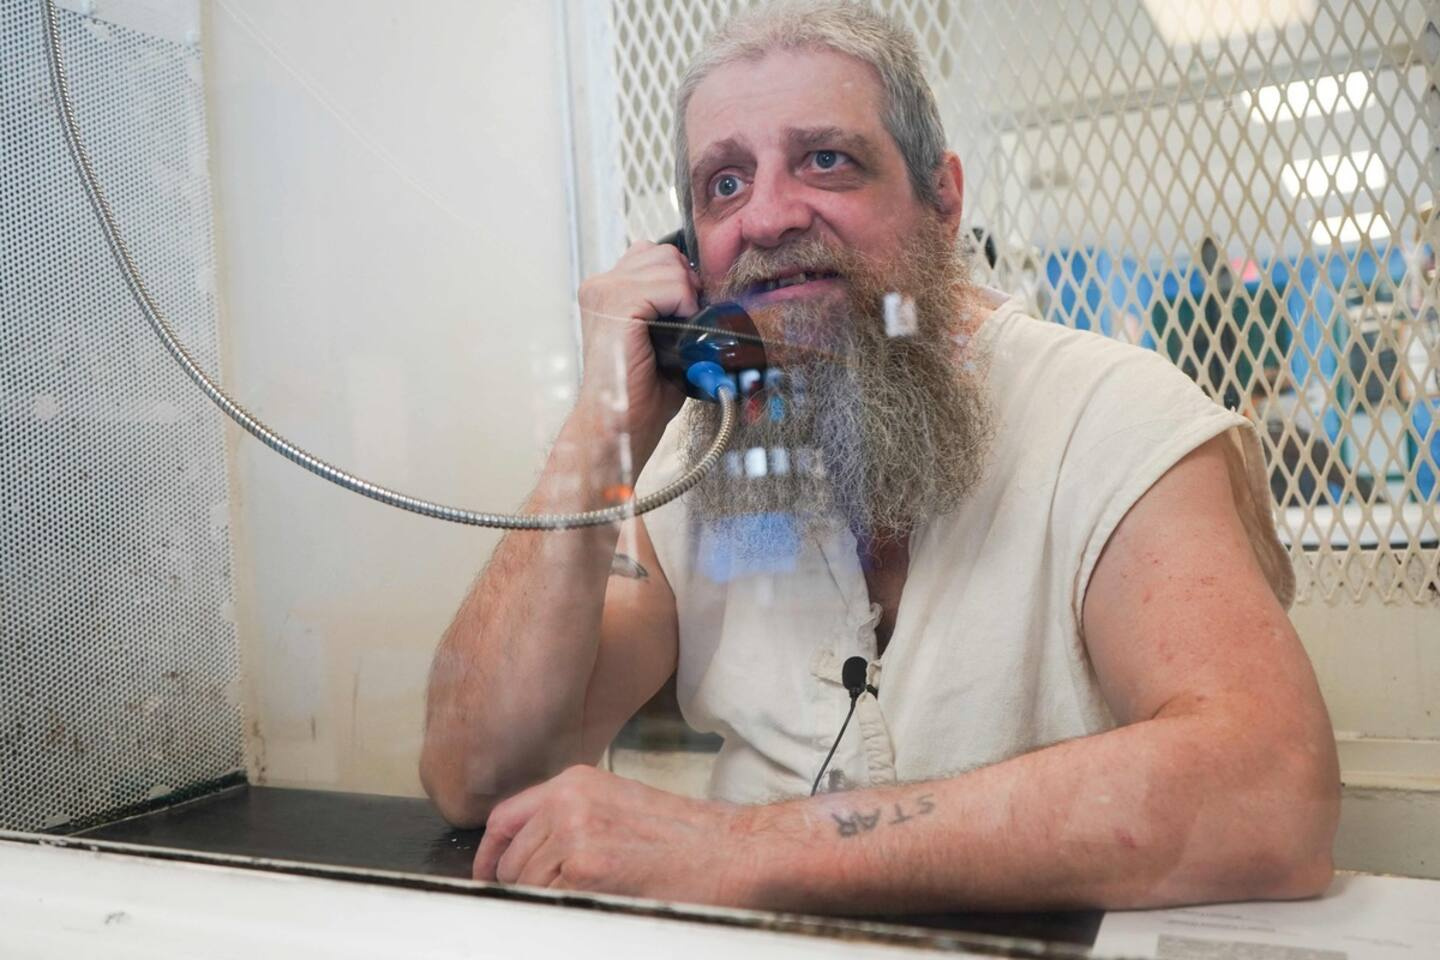 Hank Skinner says he's 'optimistic' after 27 years on death row